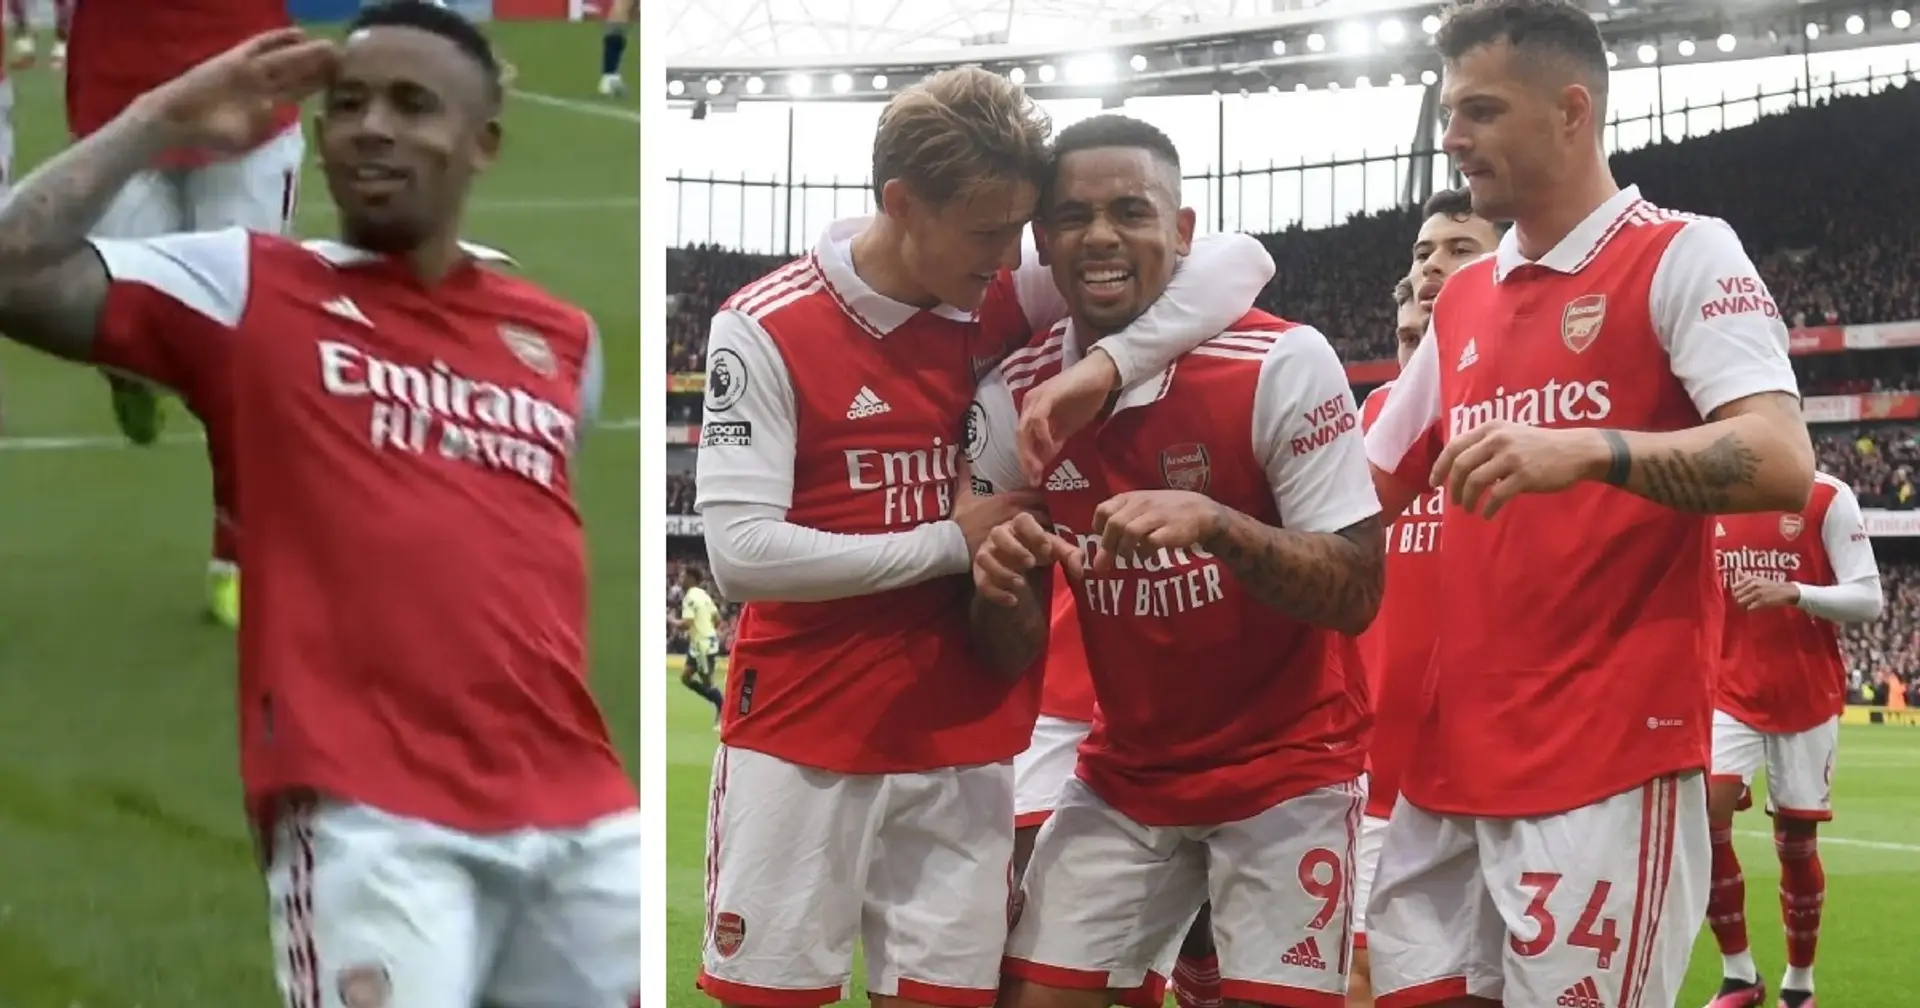 Revealed: How Arsenal players reacted to Jesus in the dressing room after his goals v Leeds